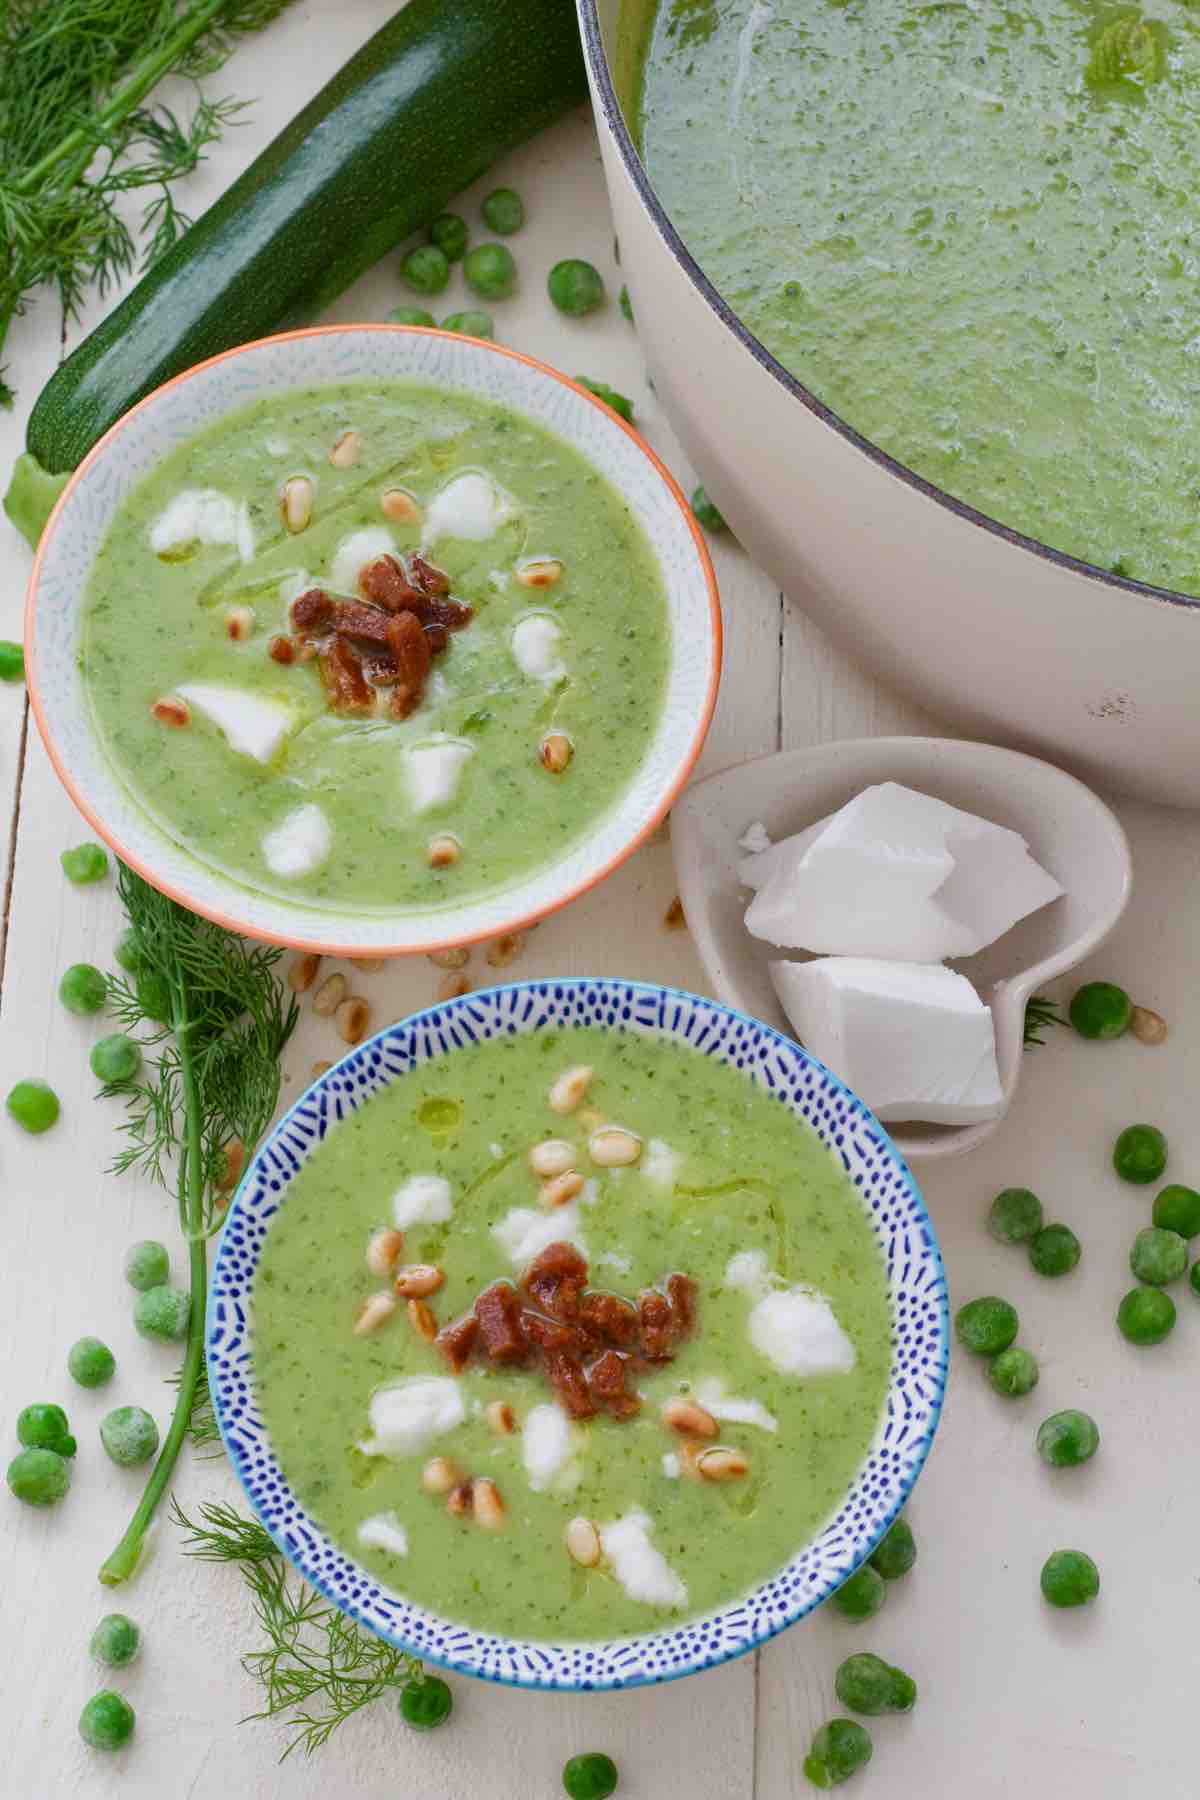 Two bowls of courgette soup with garnishes and peas scattered around.